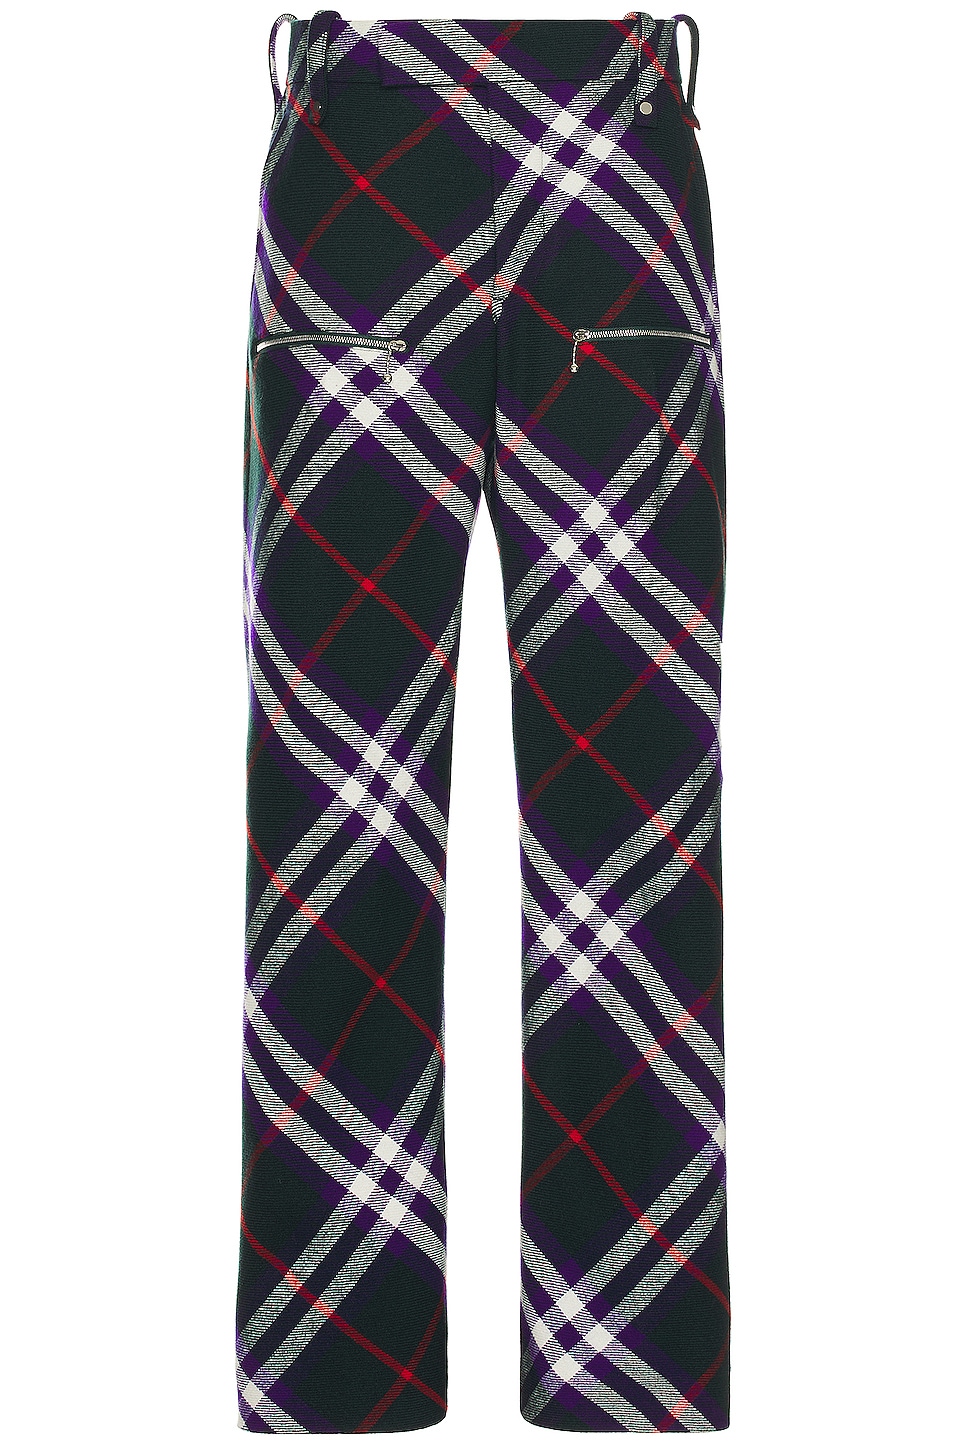 Image 1 of Burberry Check Trouser in Vine Deep Royal Ip Check